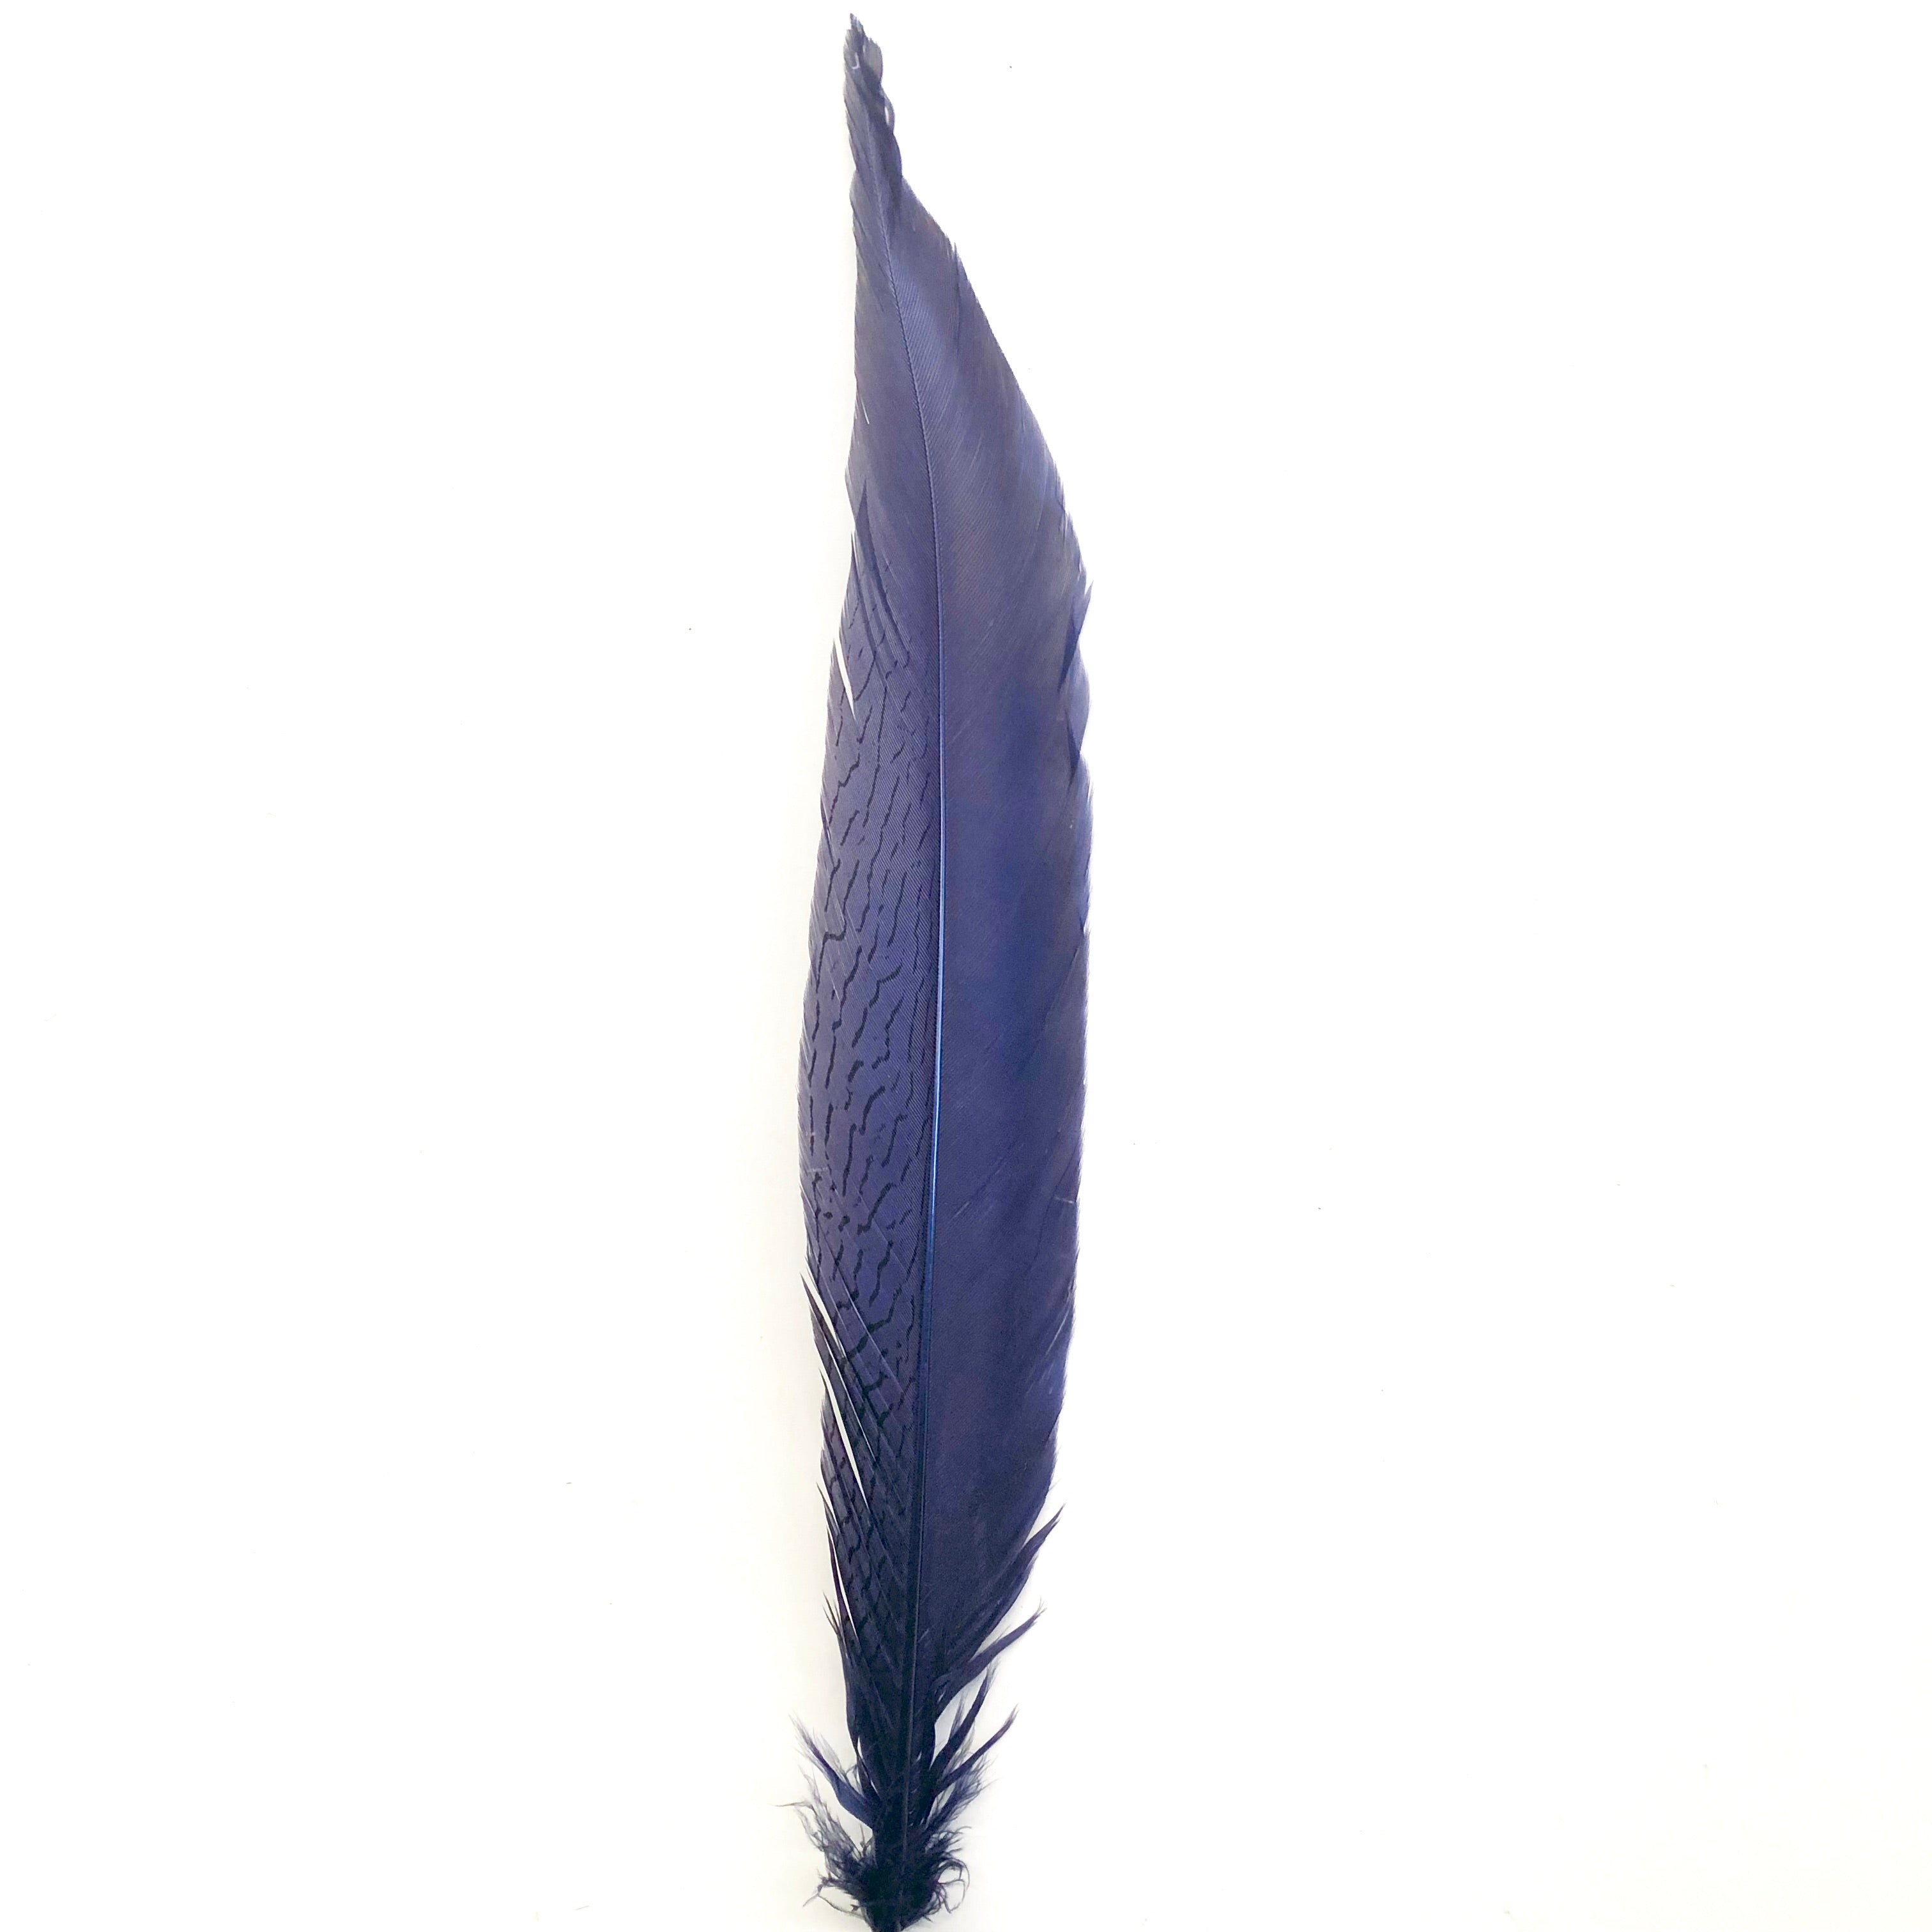 10" to 20" Silver Pheasant Tail Feather - Navy Blue